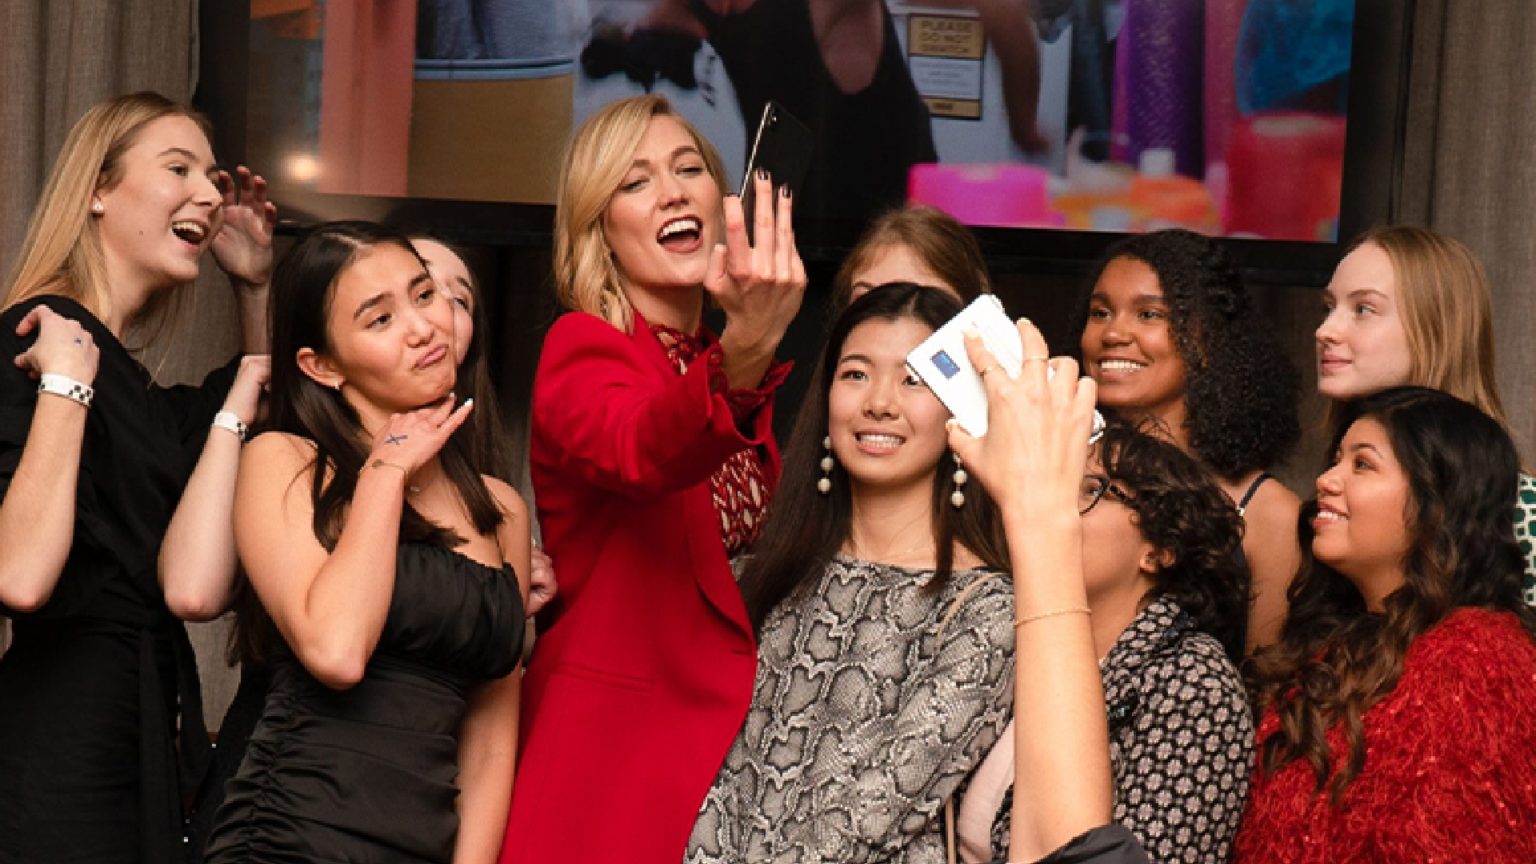 Karlie Kloss posing with fans.